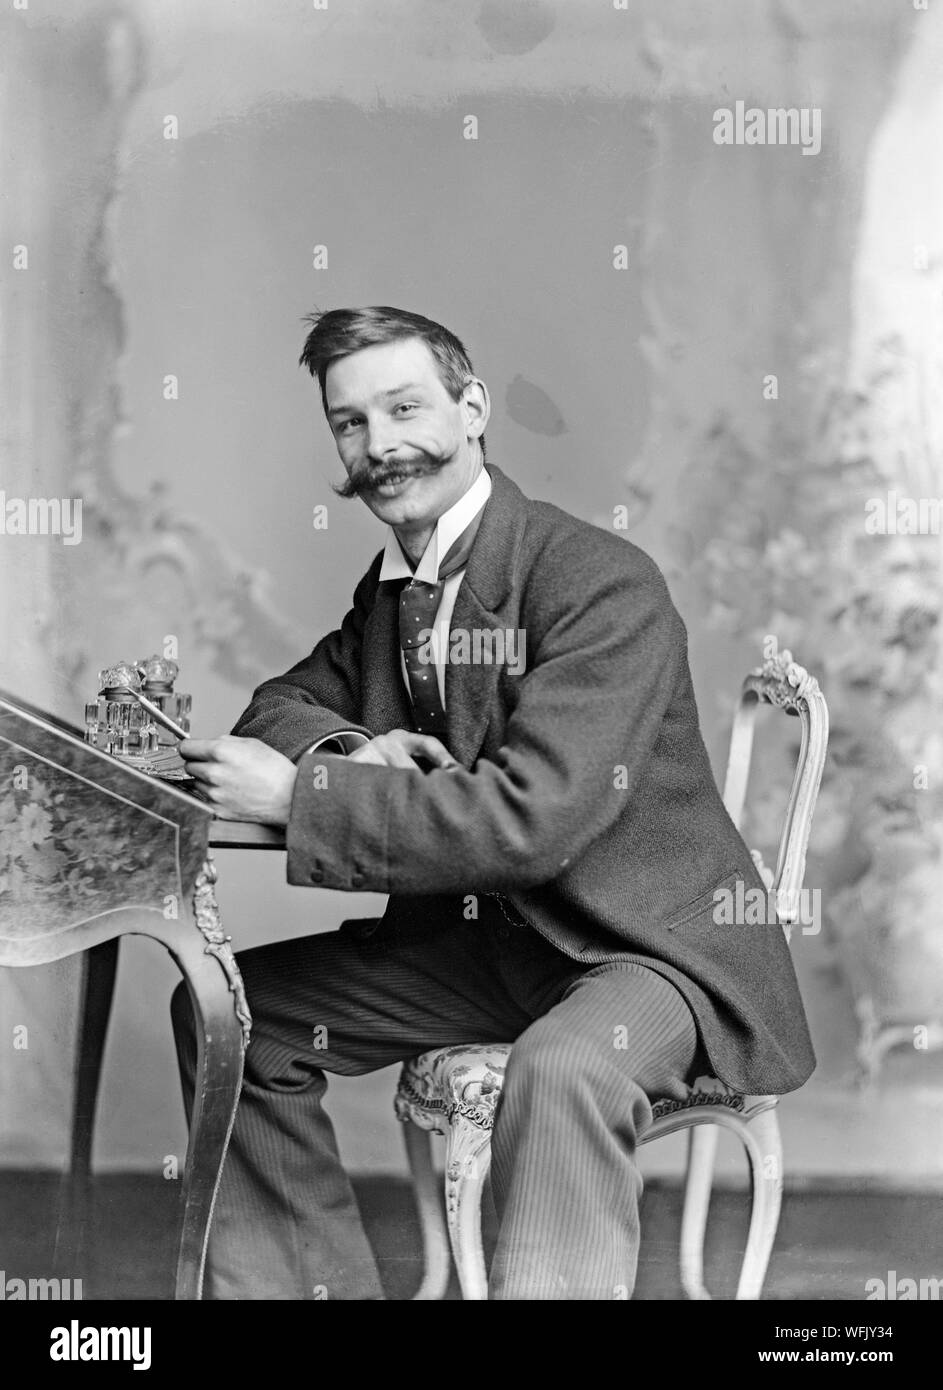 A vintage late Victorian or early Edwardian black and white photograph showing a young man with a very big moustache sitting at a writing desk with a pen in his hand, whilst he looks towards the camera smiling. Stock Photo